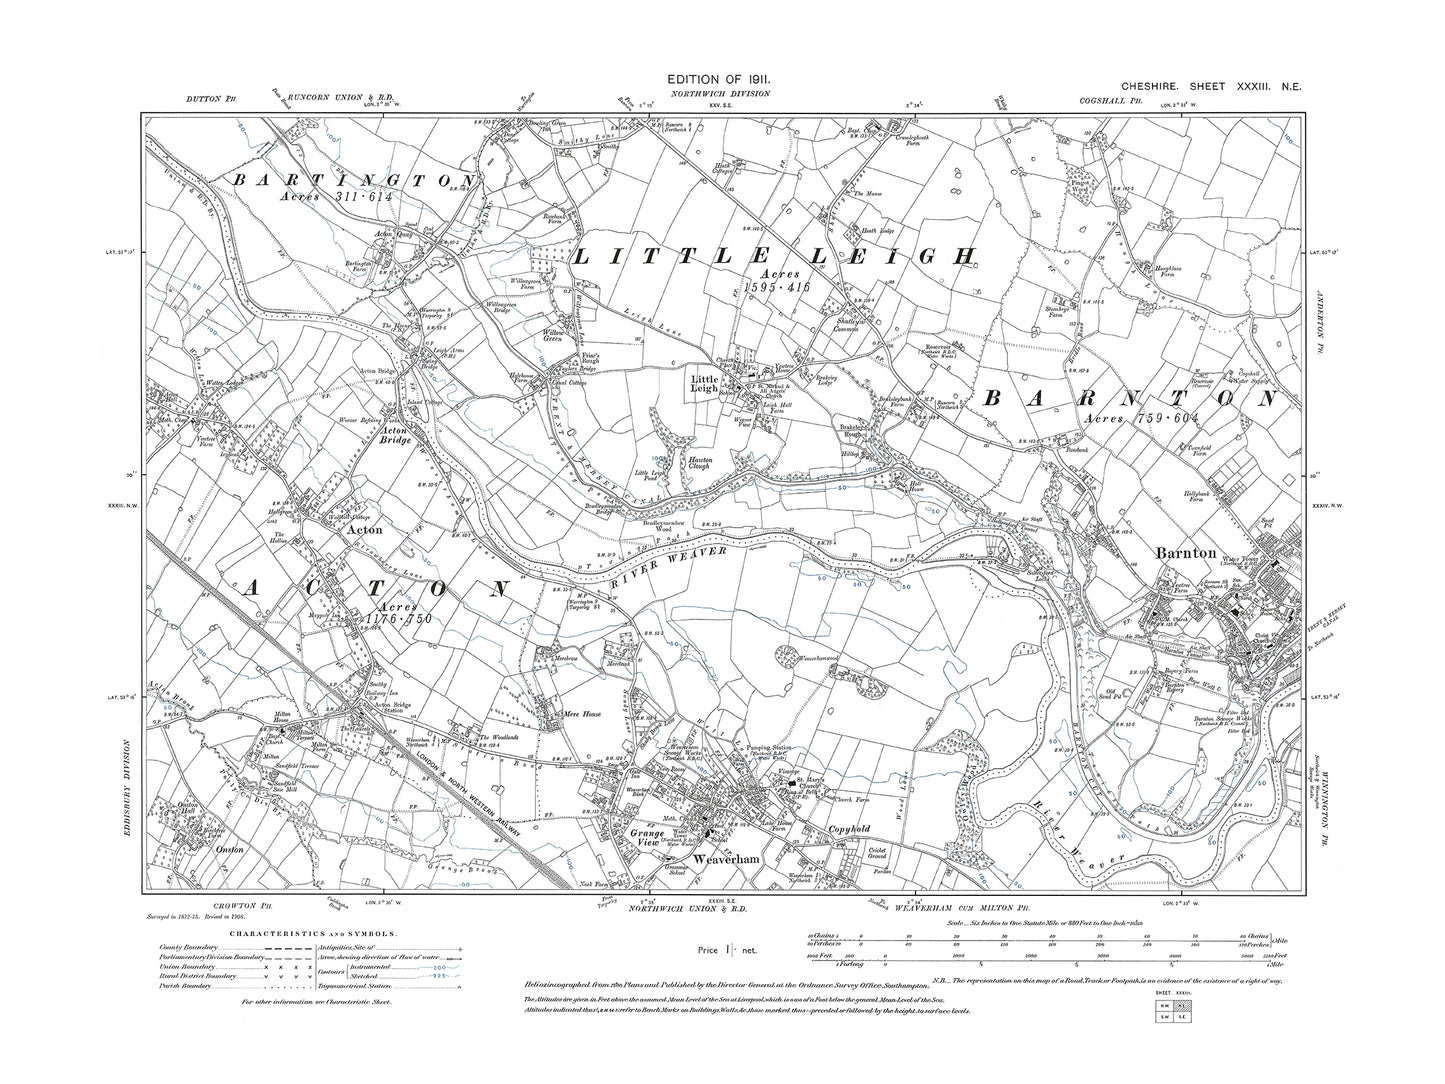 Old OS map dated 1911, showing Barnton (west), Weaverham, Acton, Little Leigh in Cheshire 33NE